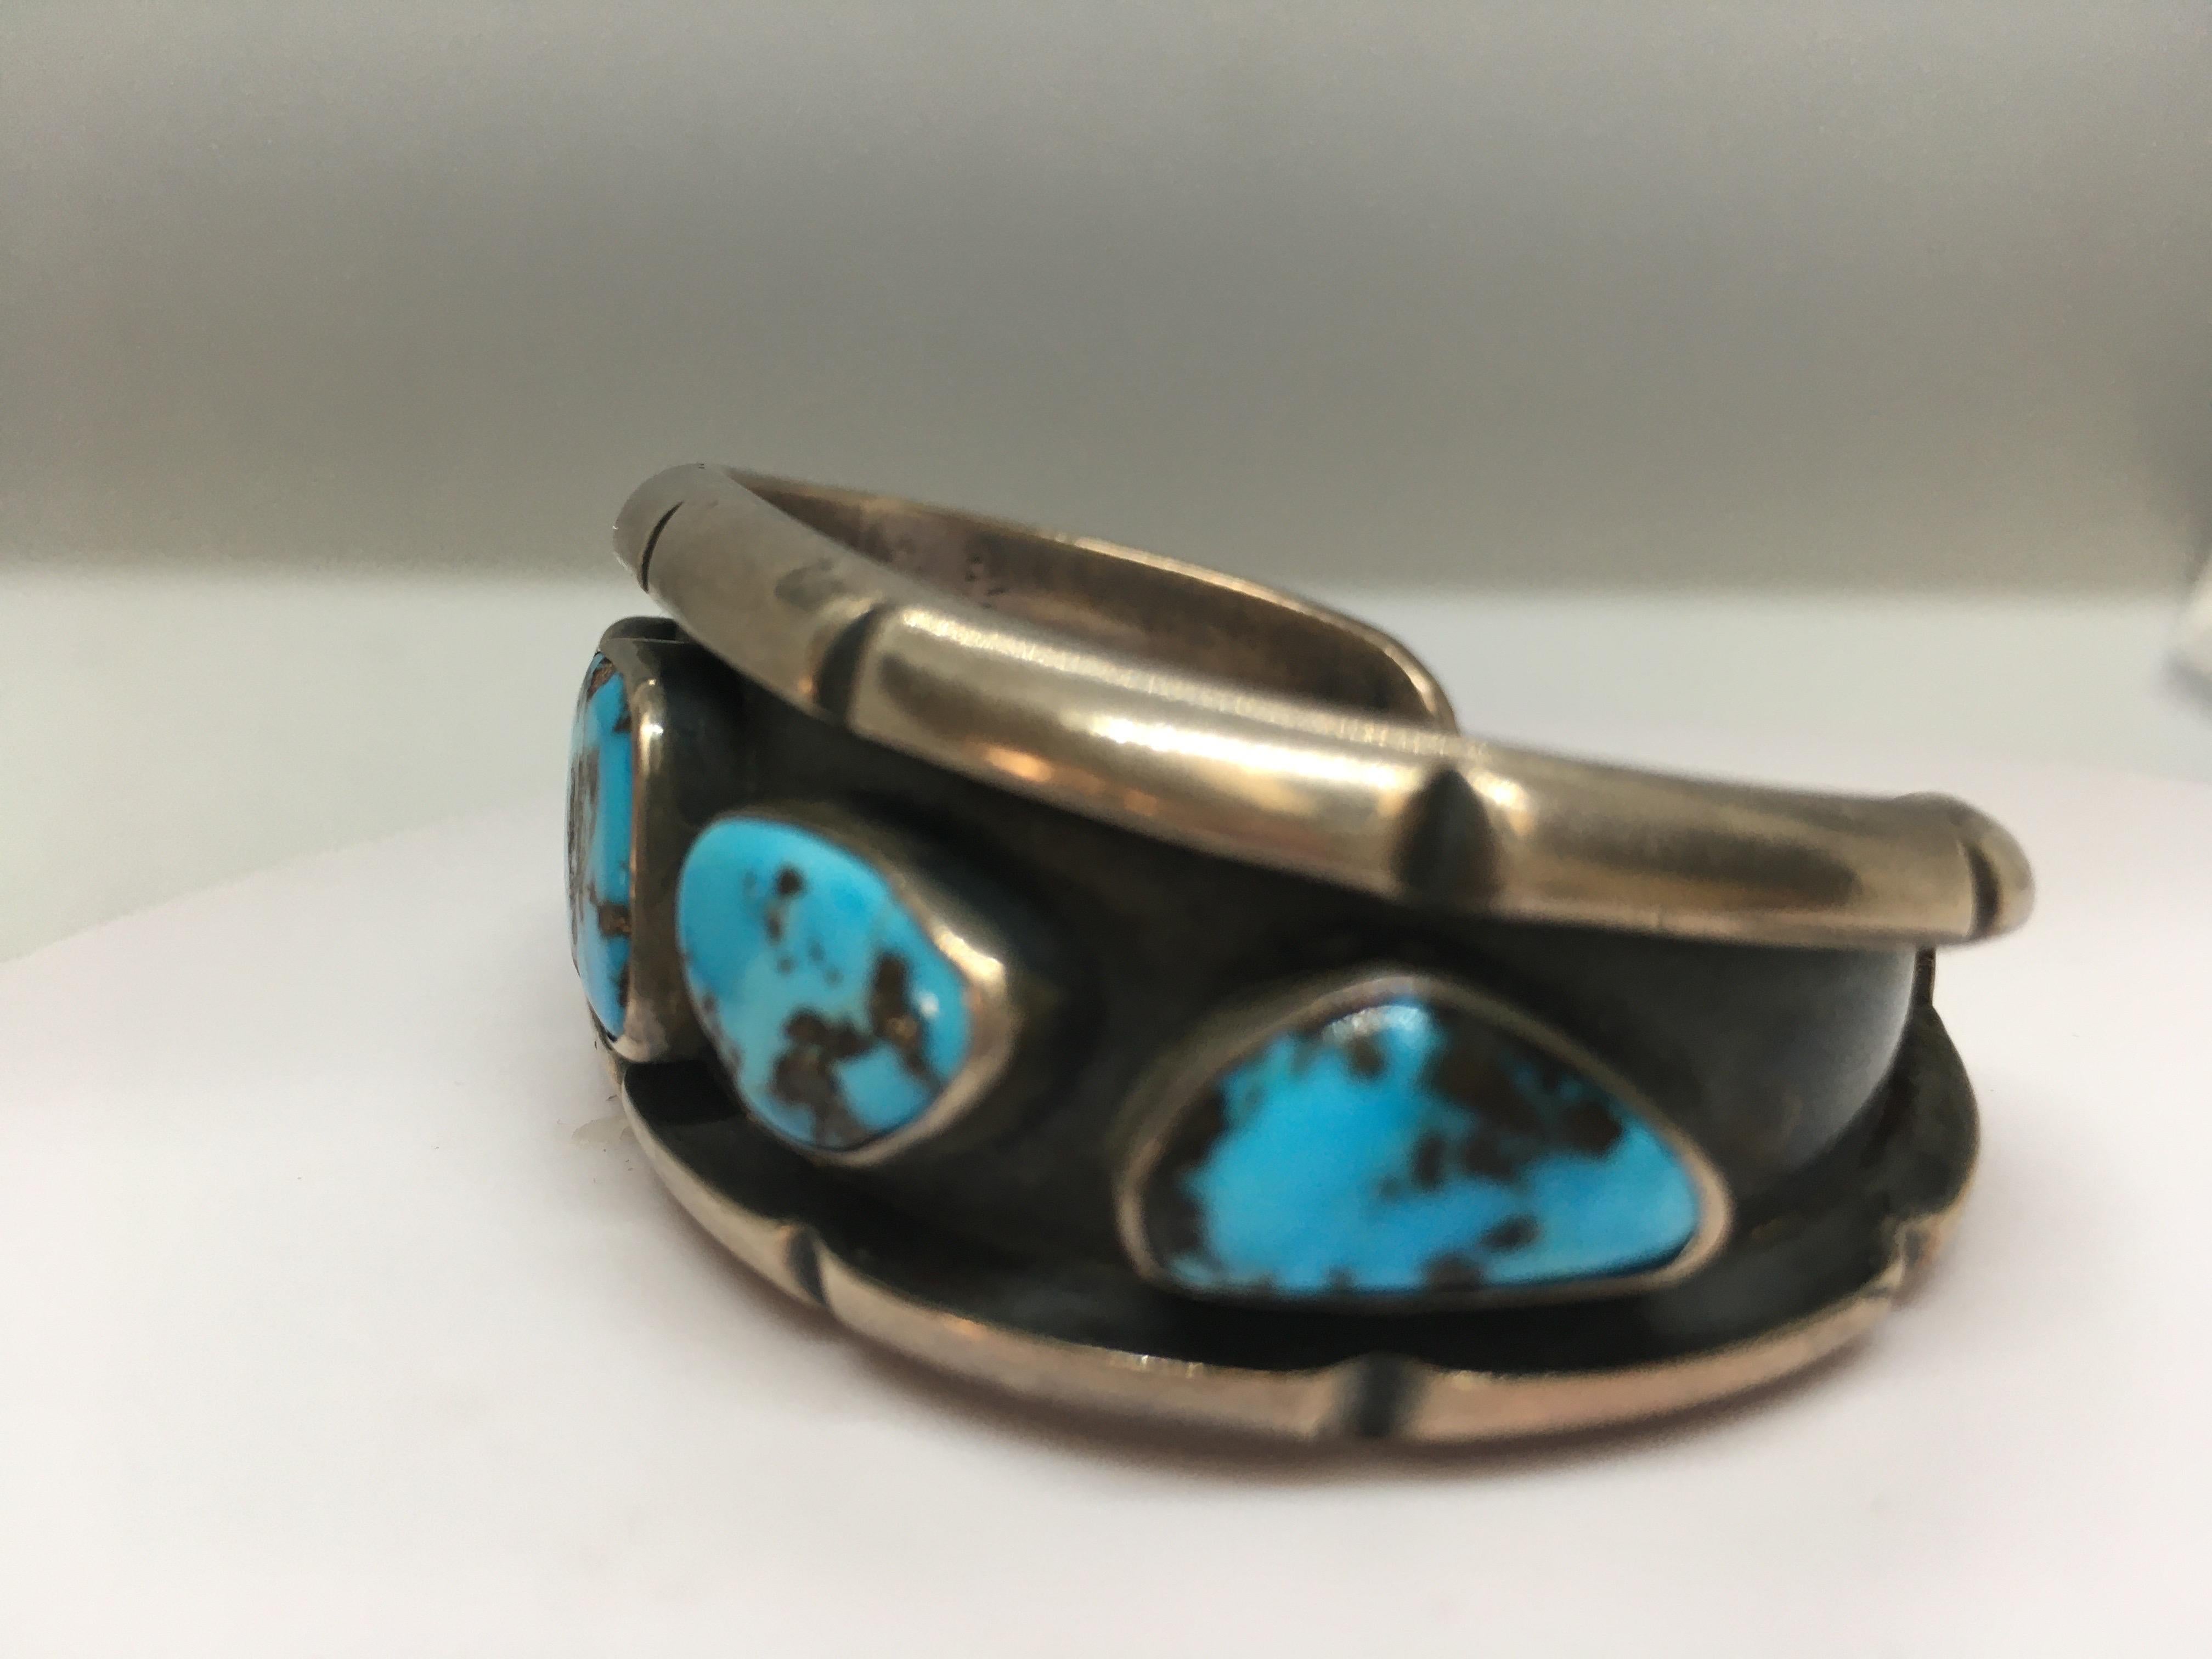 Native American Indian Silver & Turquoise Cuff Bracelet Old Pawn Navajo Vintage 1